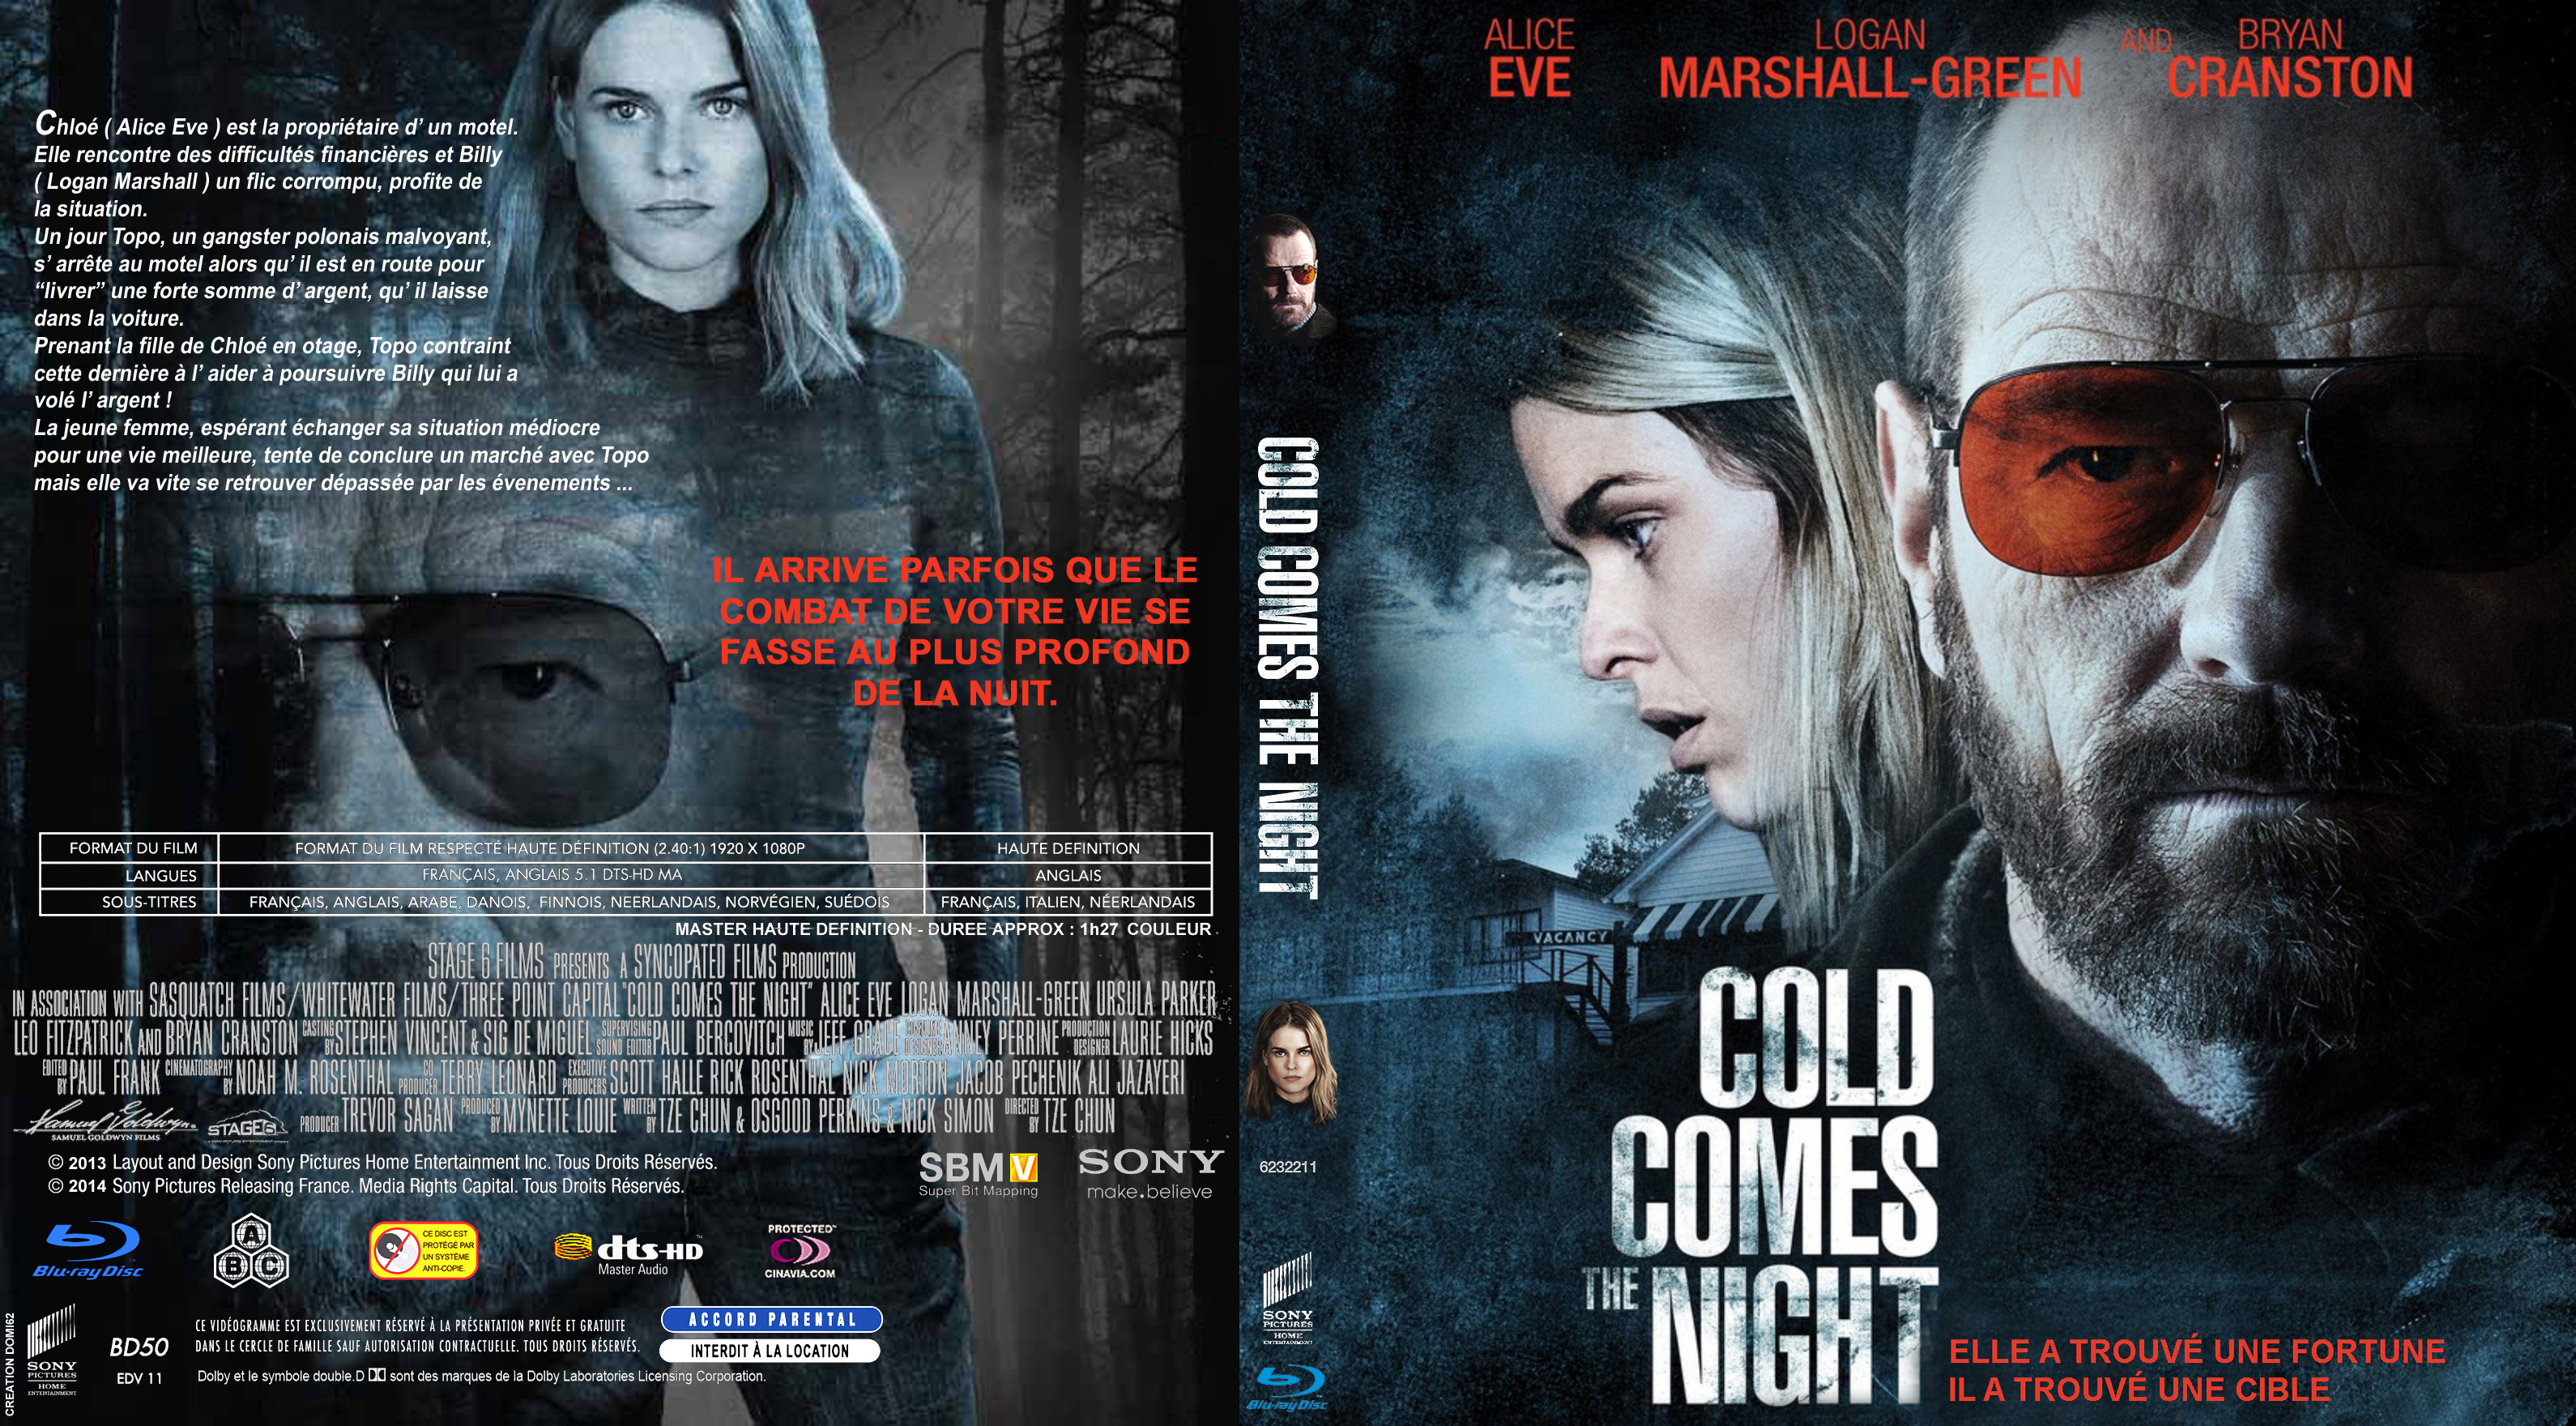 Jaquette DVD Cold comes the night custom (BLU-RAY)